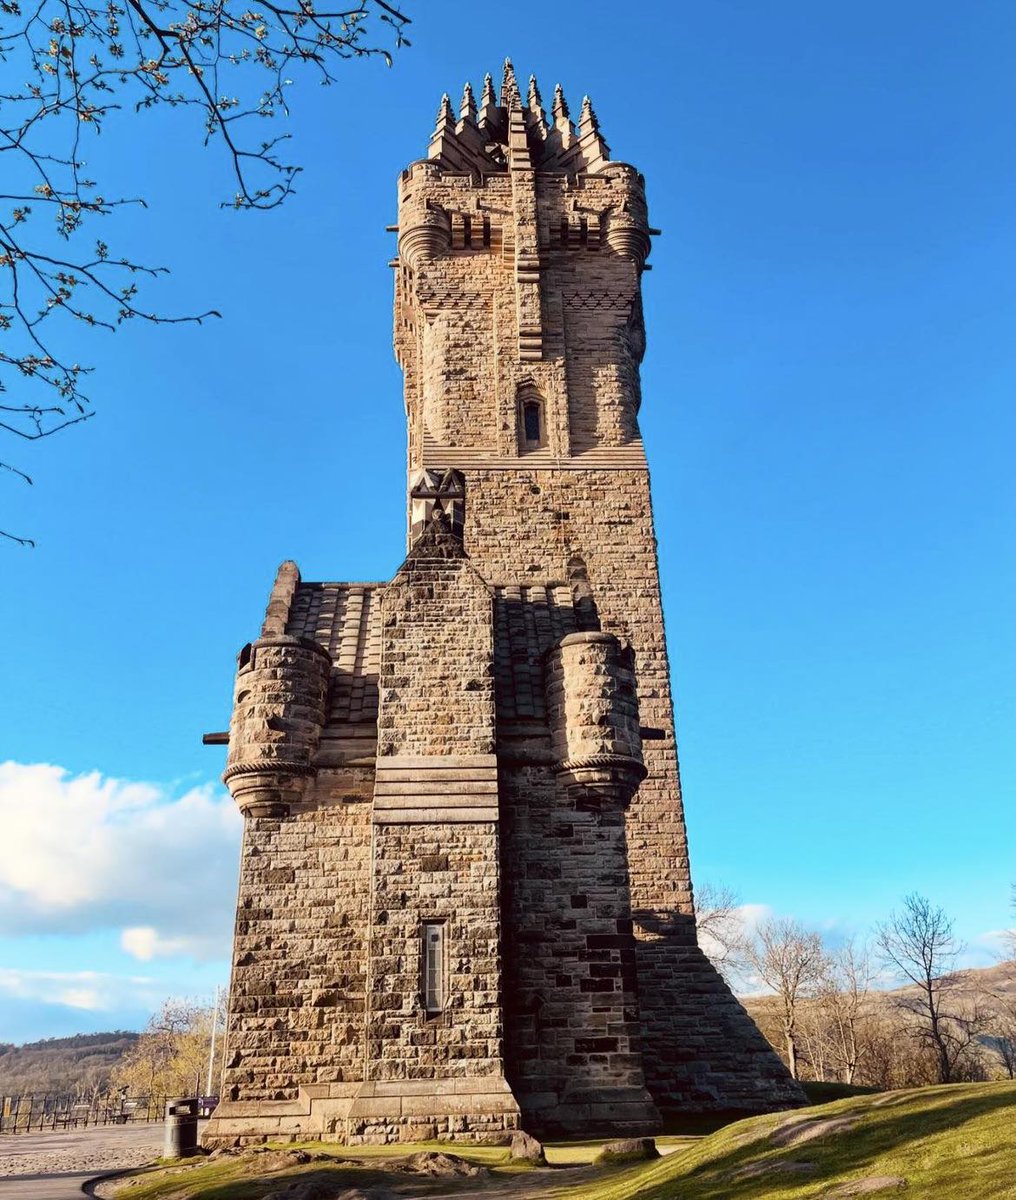 Lovely views of the sun shining down on The National Wallace Monument in Stirling ☀️. Have you climbed the 246-step spiral staircase before? 🏴󠁧󠁢󠁳󠁣󠁴󠁿 IG/sevan.nous.avanture #VisitScotland